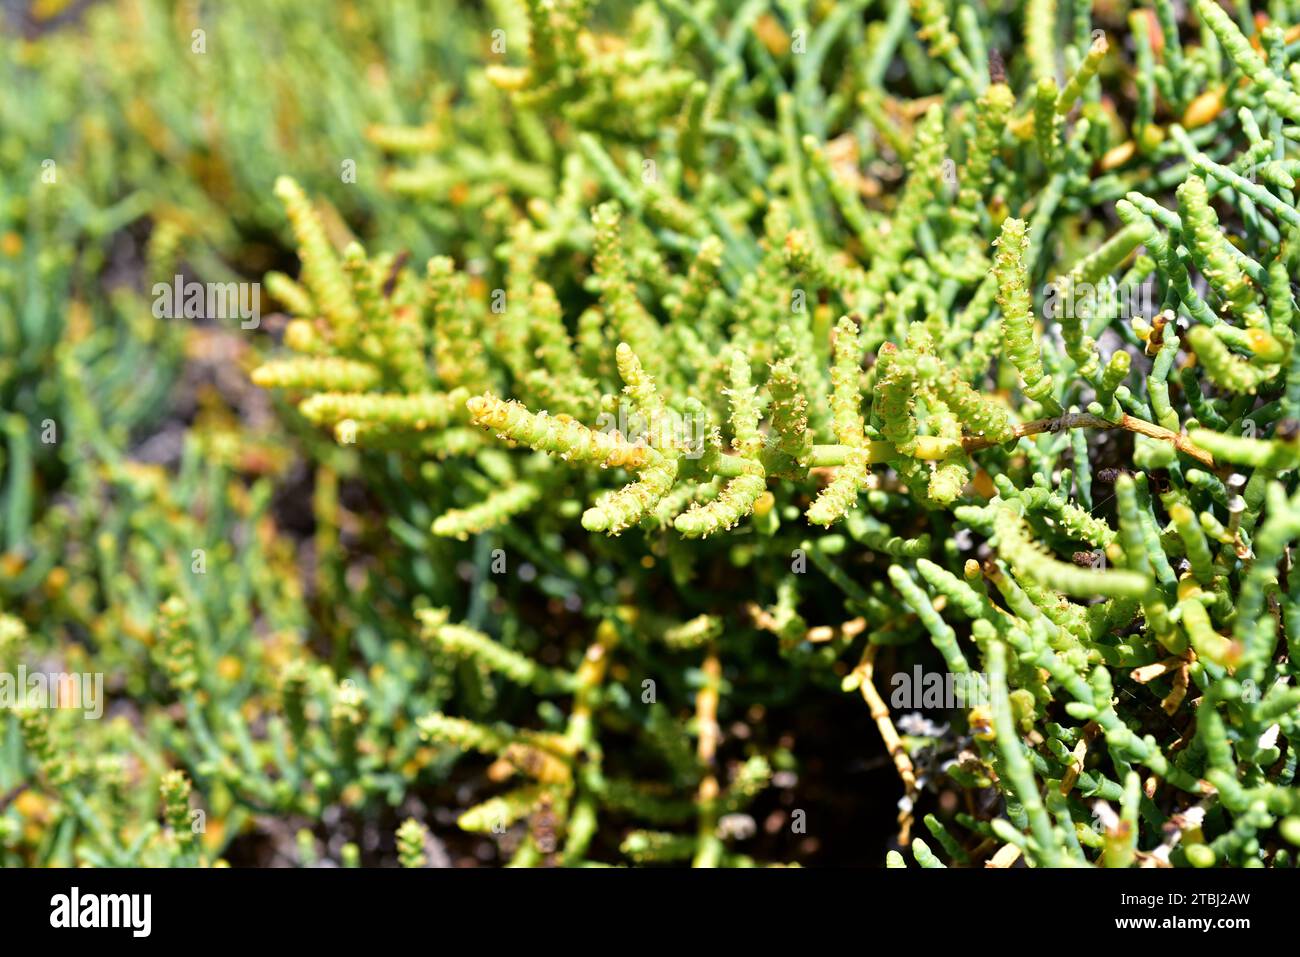 Arthrocnemum macrostachyum is a succulent subshrub that grows on saline soils (salt marshes) in Mediterranean Basin coasts, Canary Islands and Middle Stock Photo